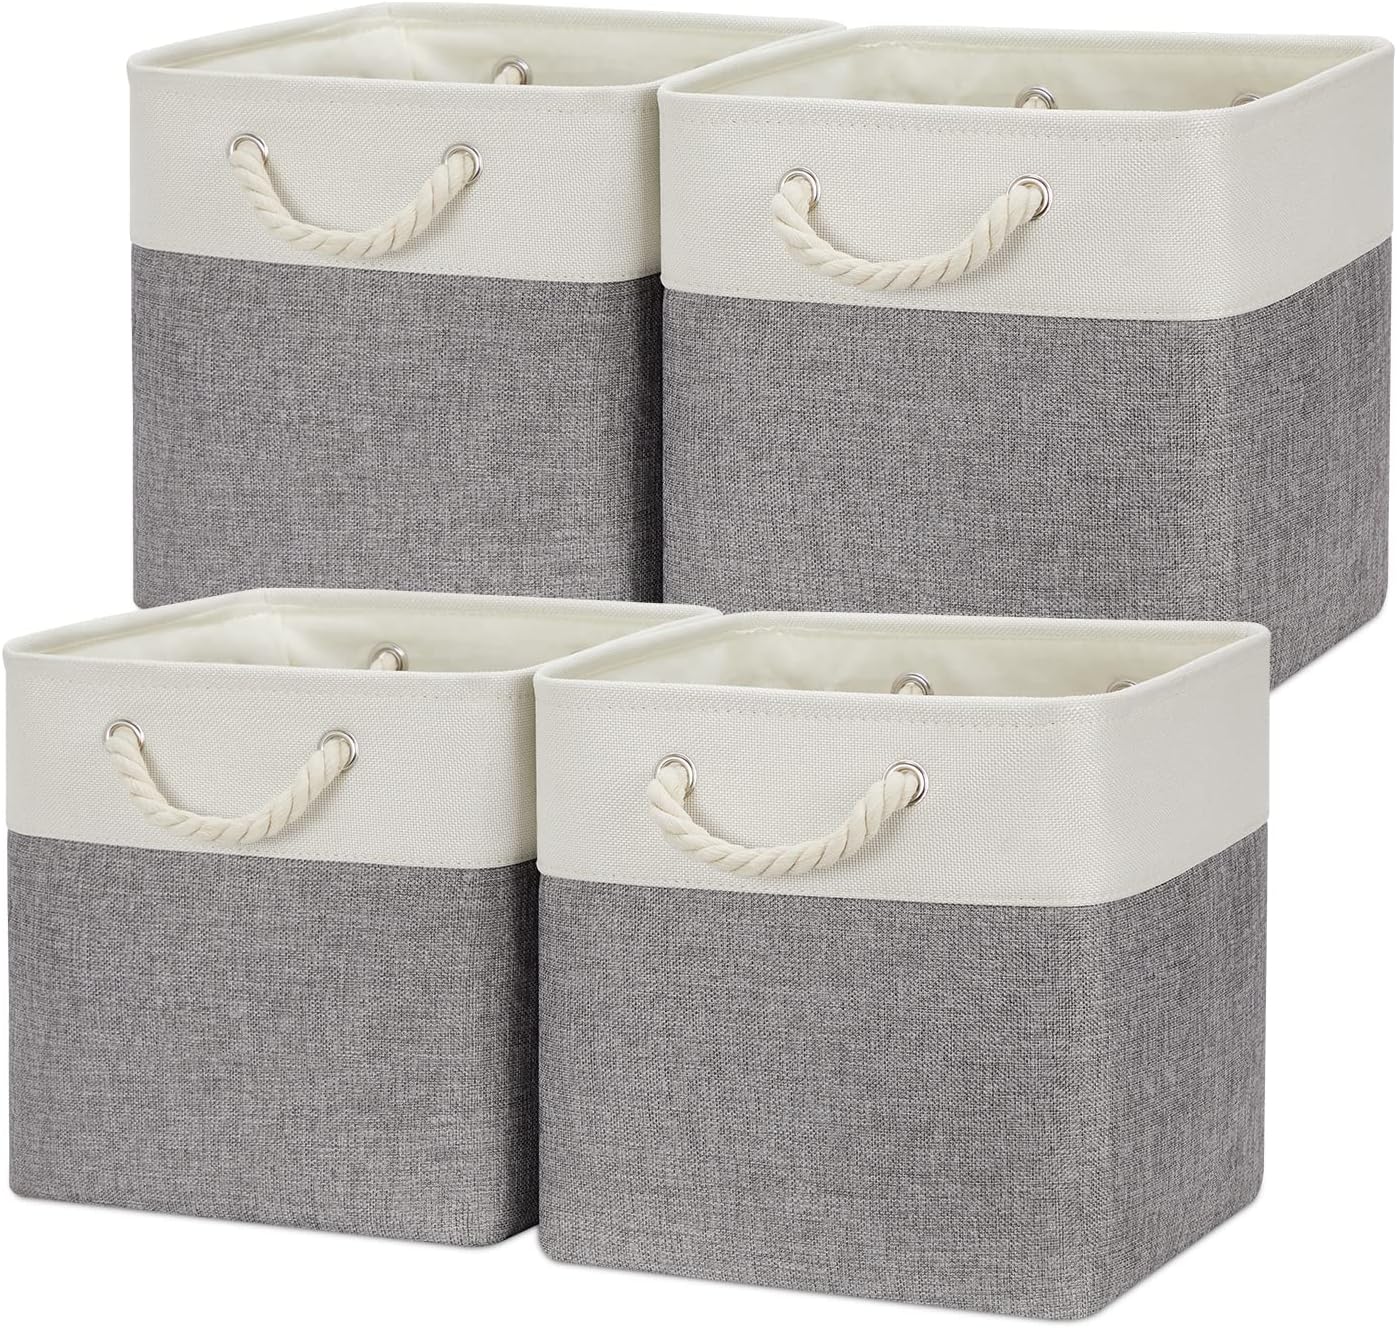 Temary Fabric Baskets Storage 12 Inch Storage Cubes Storage Baskets with Handle, Clothes Baskets for Gift, Large Baskets for Storage Toys, Books, Blankets (White&Gray)